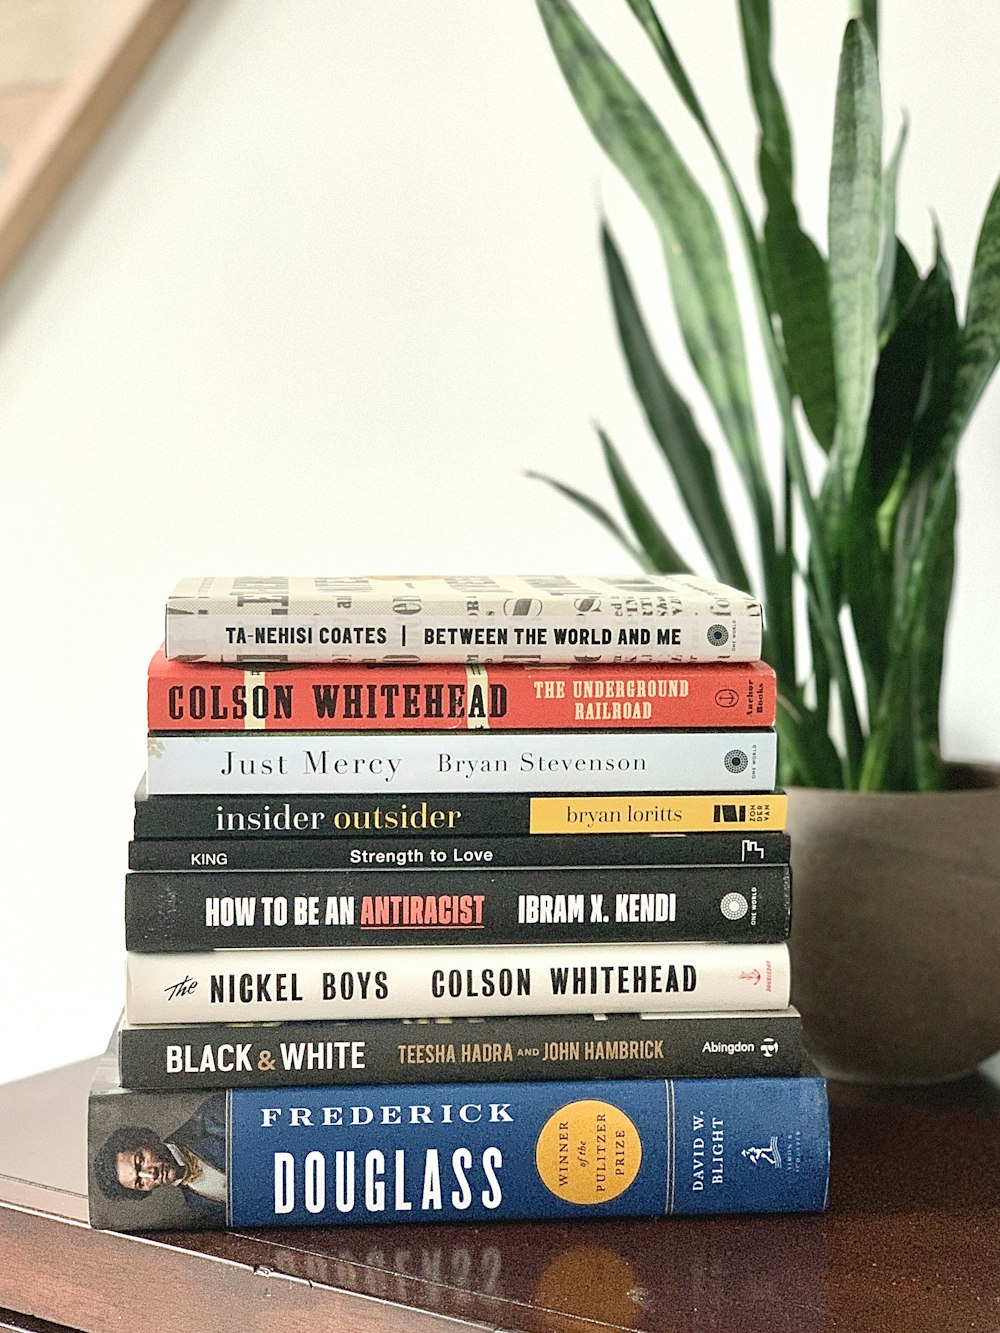 stack of books on white table